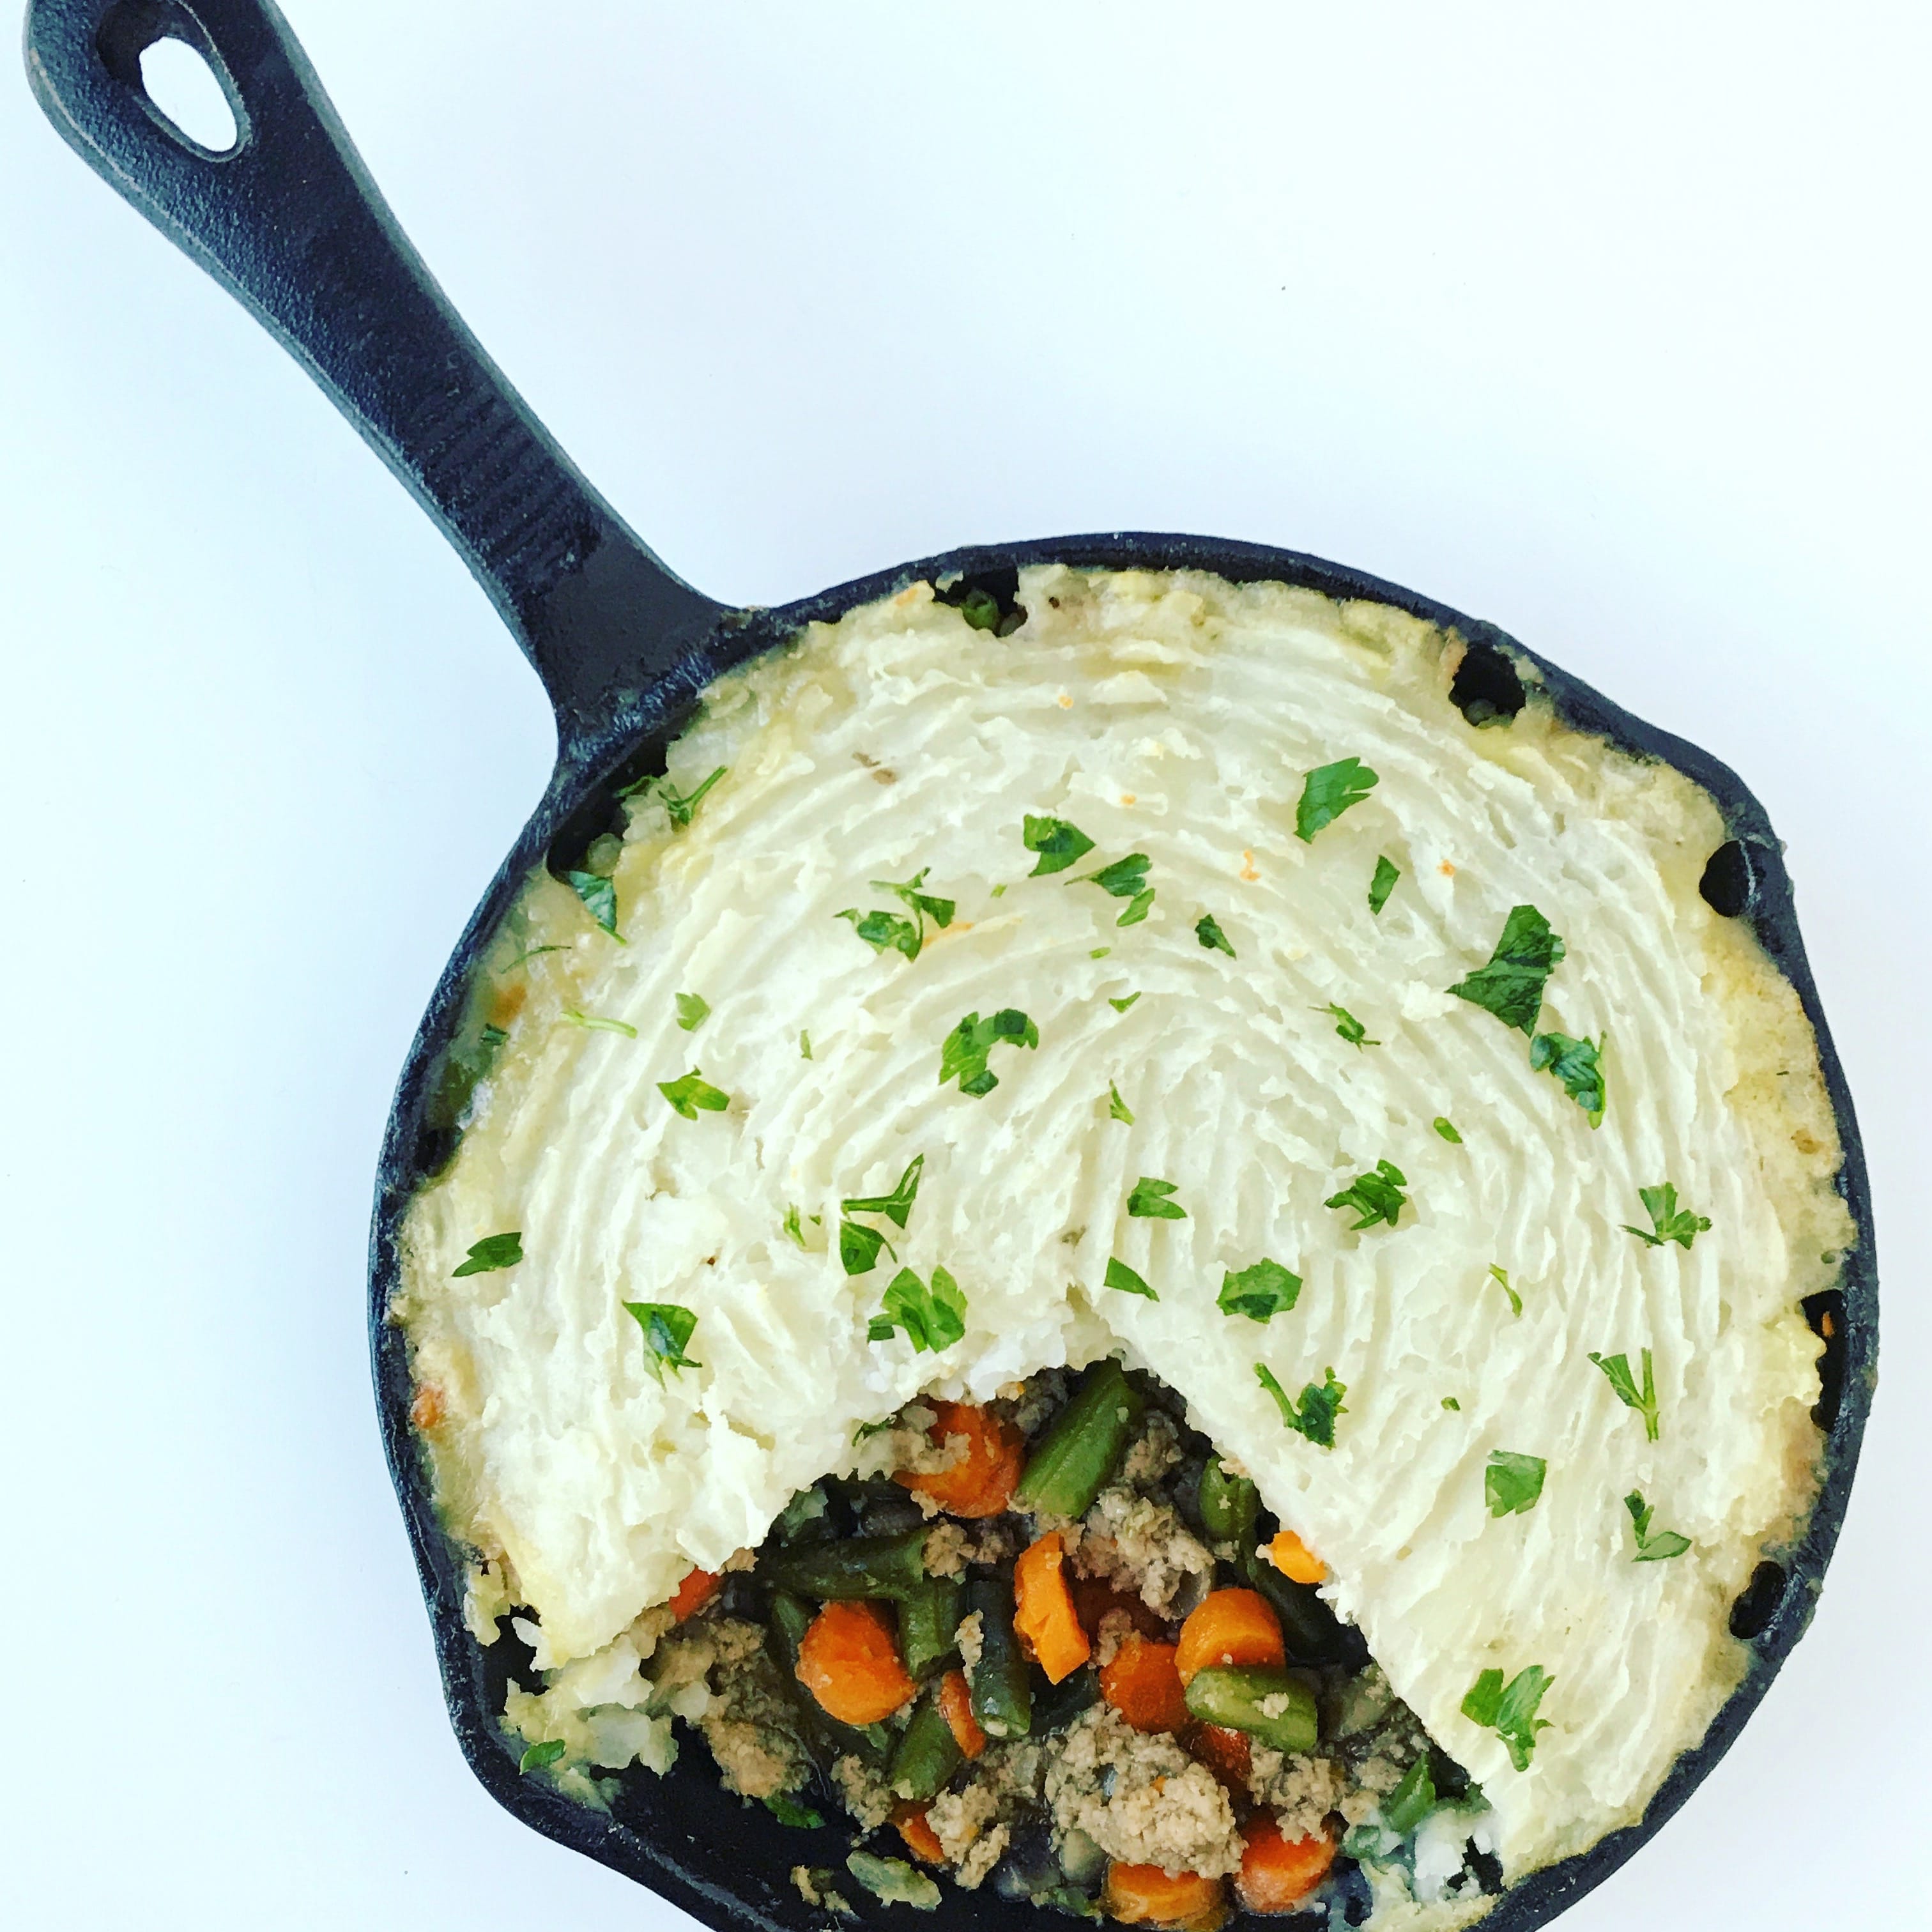 a cast iron skillet full of shepard's pie, topped with fresh chopped parsley